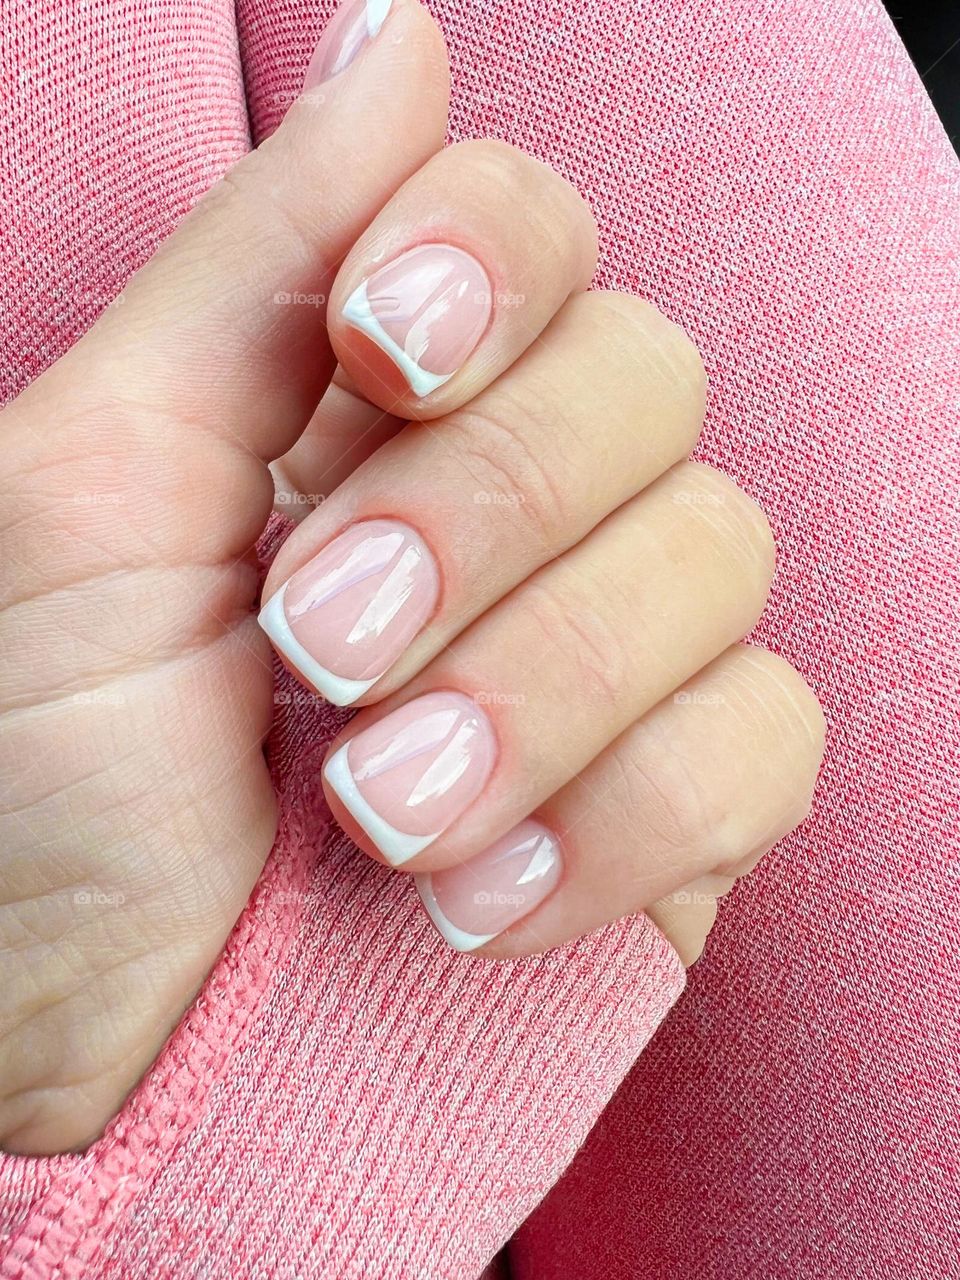 female hands with manicure